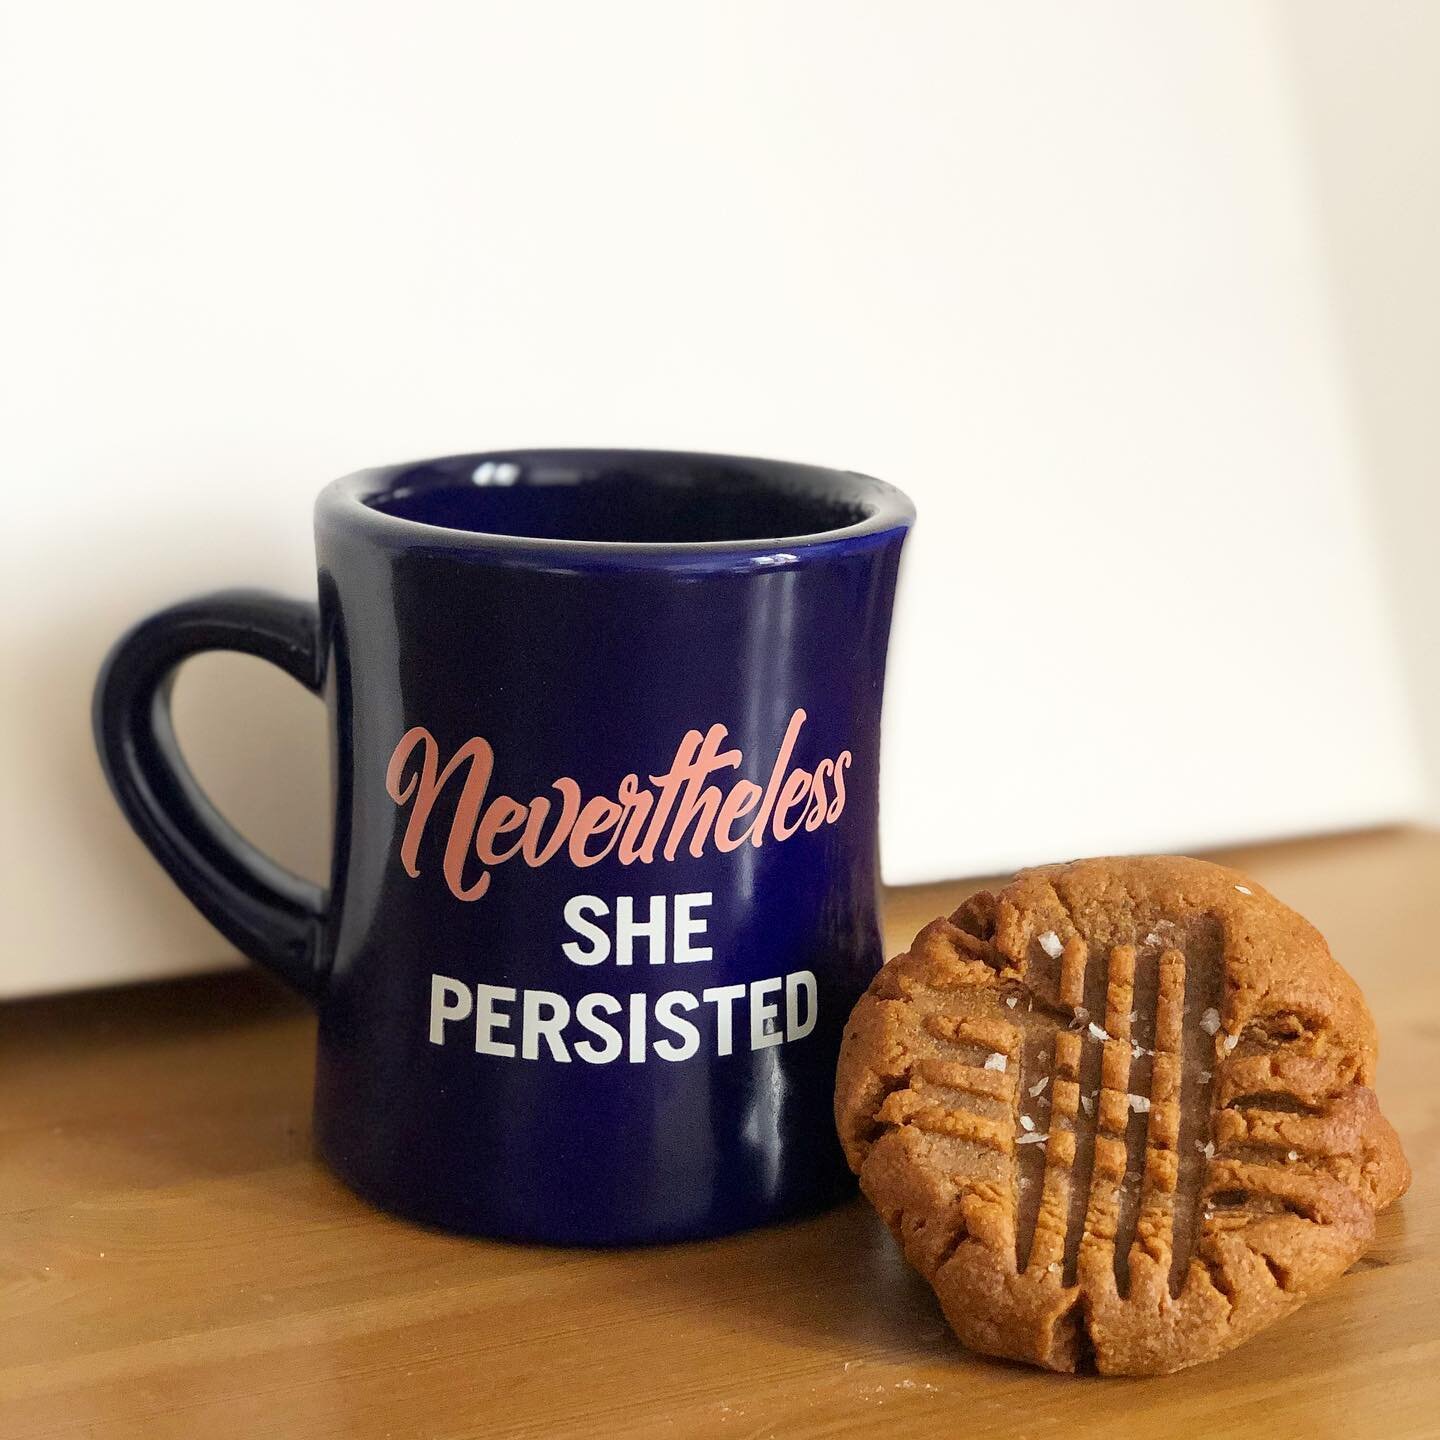 Coffee breaks with salted peanut butter cookies: Monday is looking a-ok! Find one of your own at @teaandsympathyedinburgh or order a box straight from the source. 😘
#edinburgh #baking #sukibakes #eatlocal #shopsmall #supportsmallbusiness #loveleith 